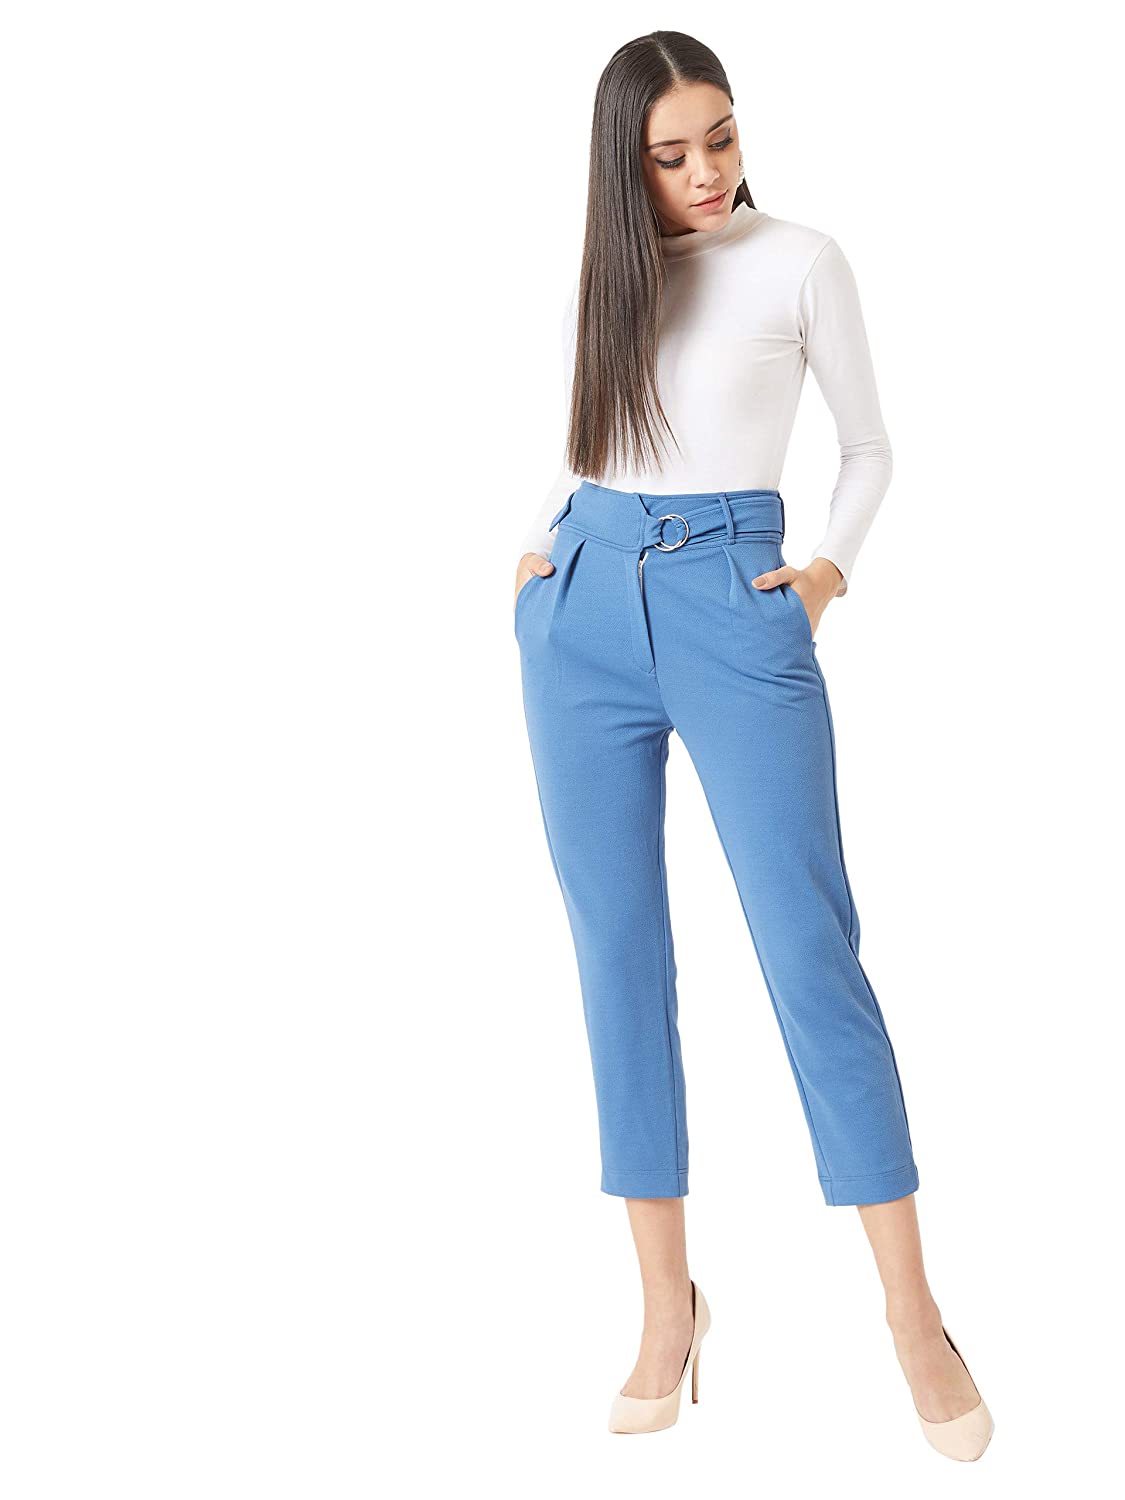 Women's Pleated Relaxed Pants